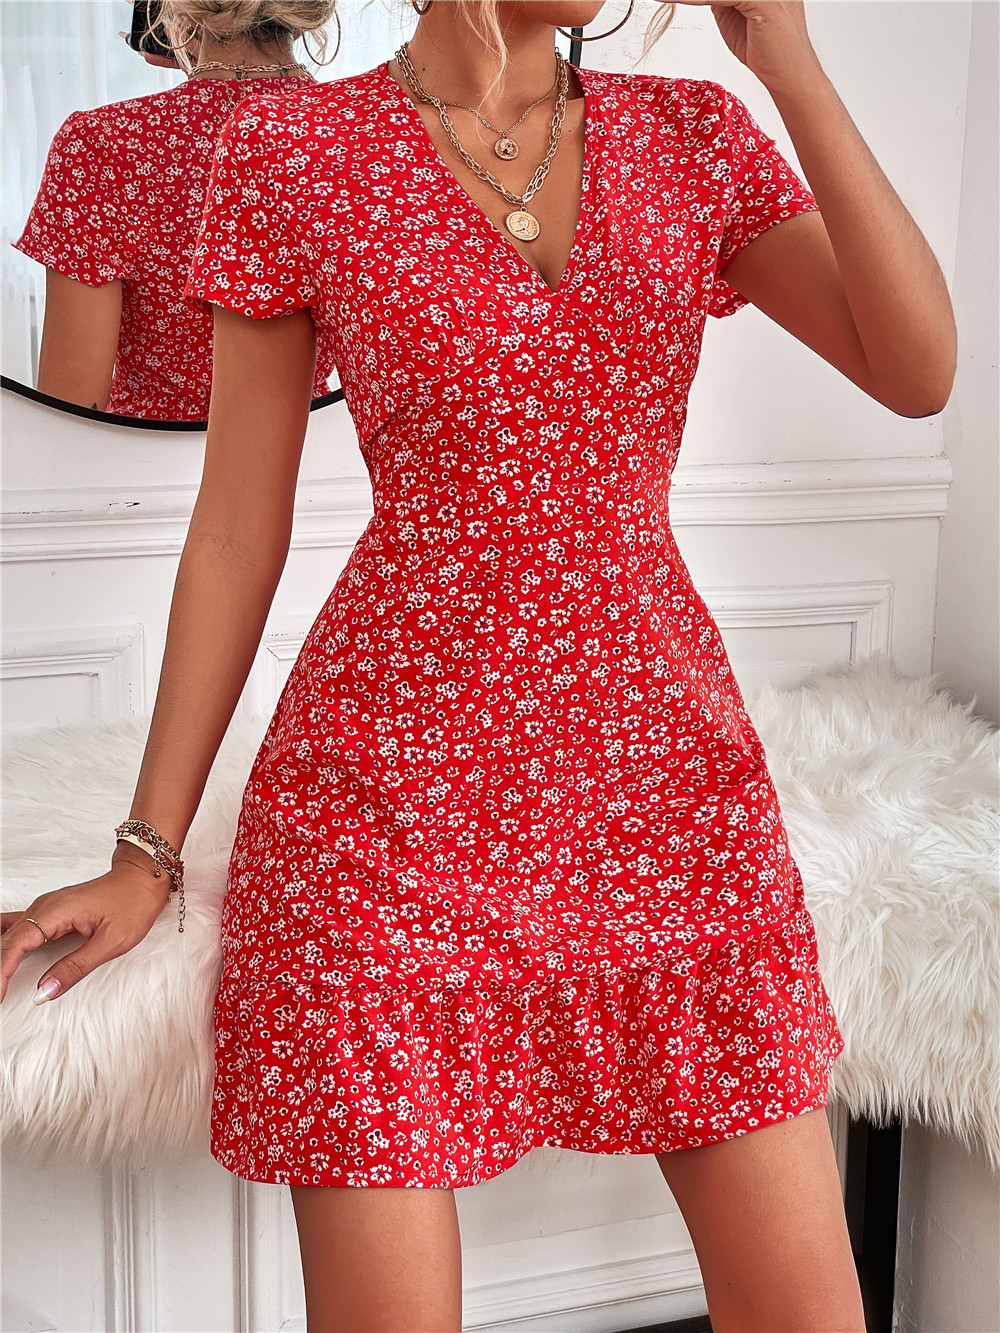 2022 Summer Europe and America Cross Border Exclusive Women's Clothing AliExpress Amazon Hot Selling V-neck Dotted Floral Dress for Women